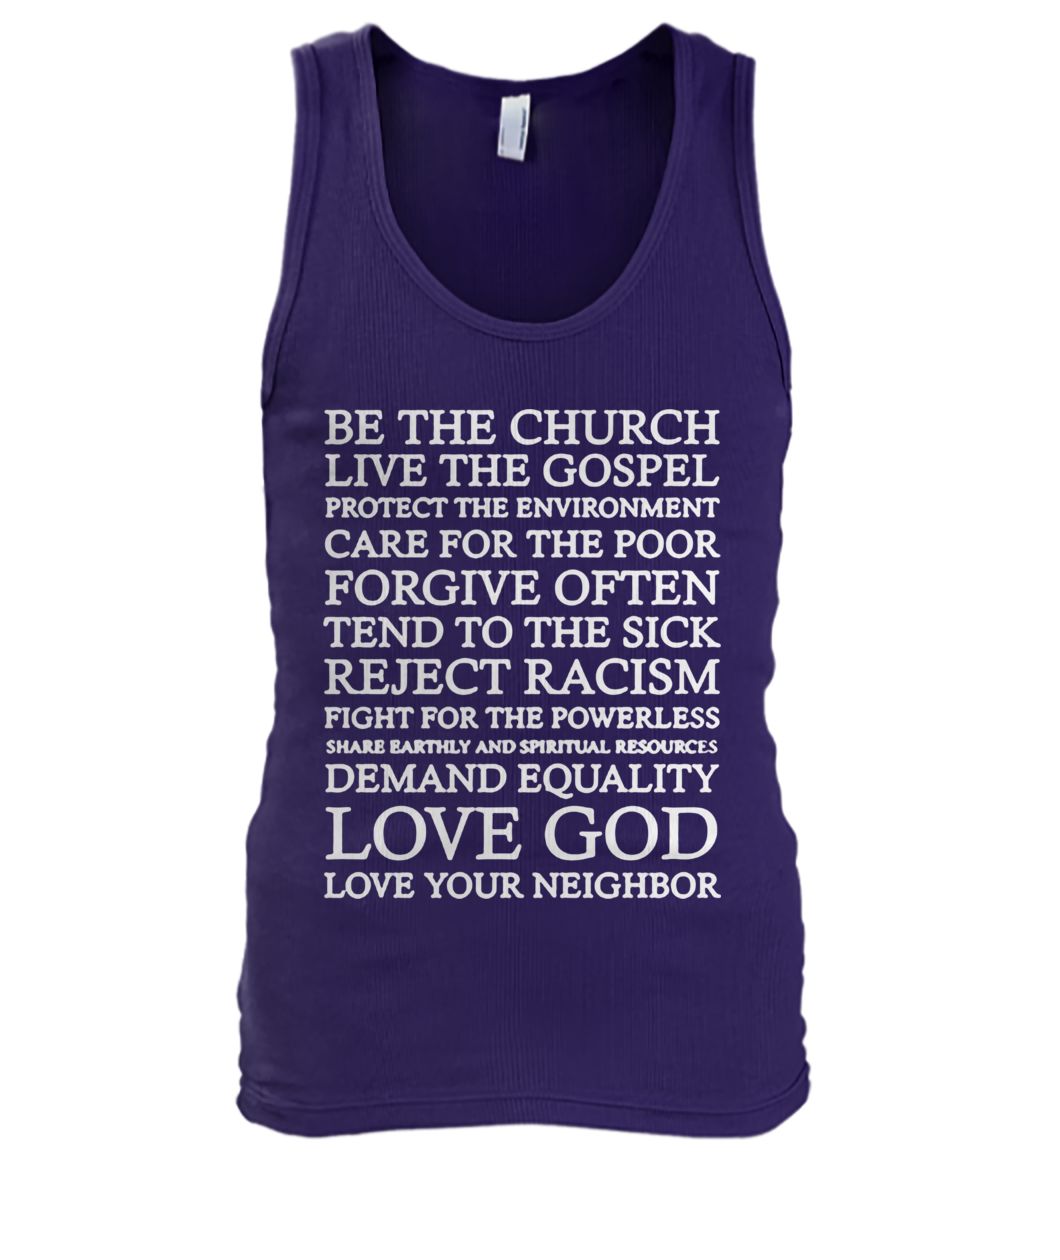 Be the church live the gospel protect the enviroment men's tank top